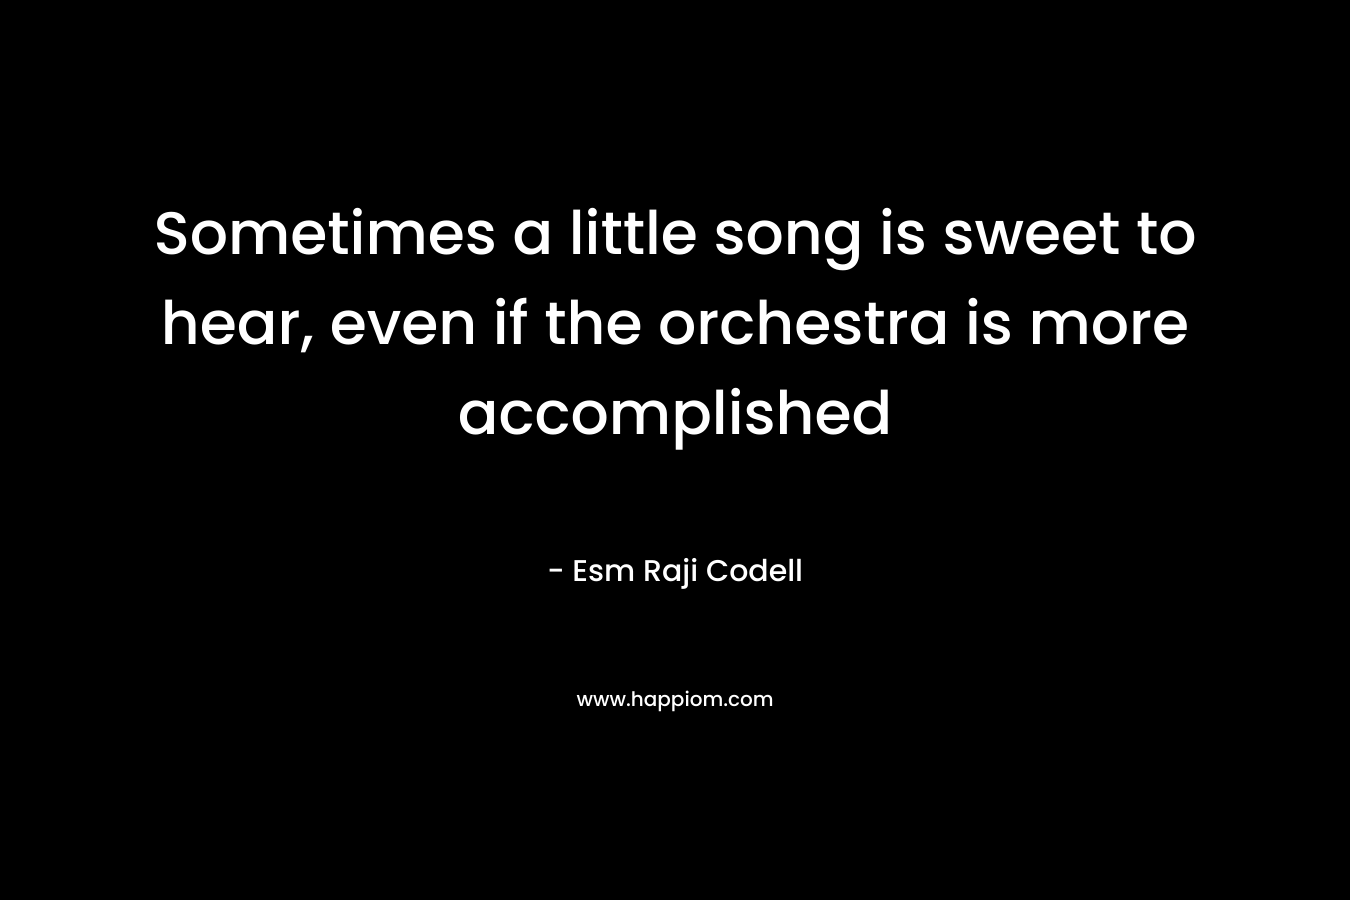 Sometimes a little song is sweet to hear, even if the orchestra is more accomplished – Esm Raji Codell